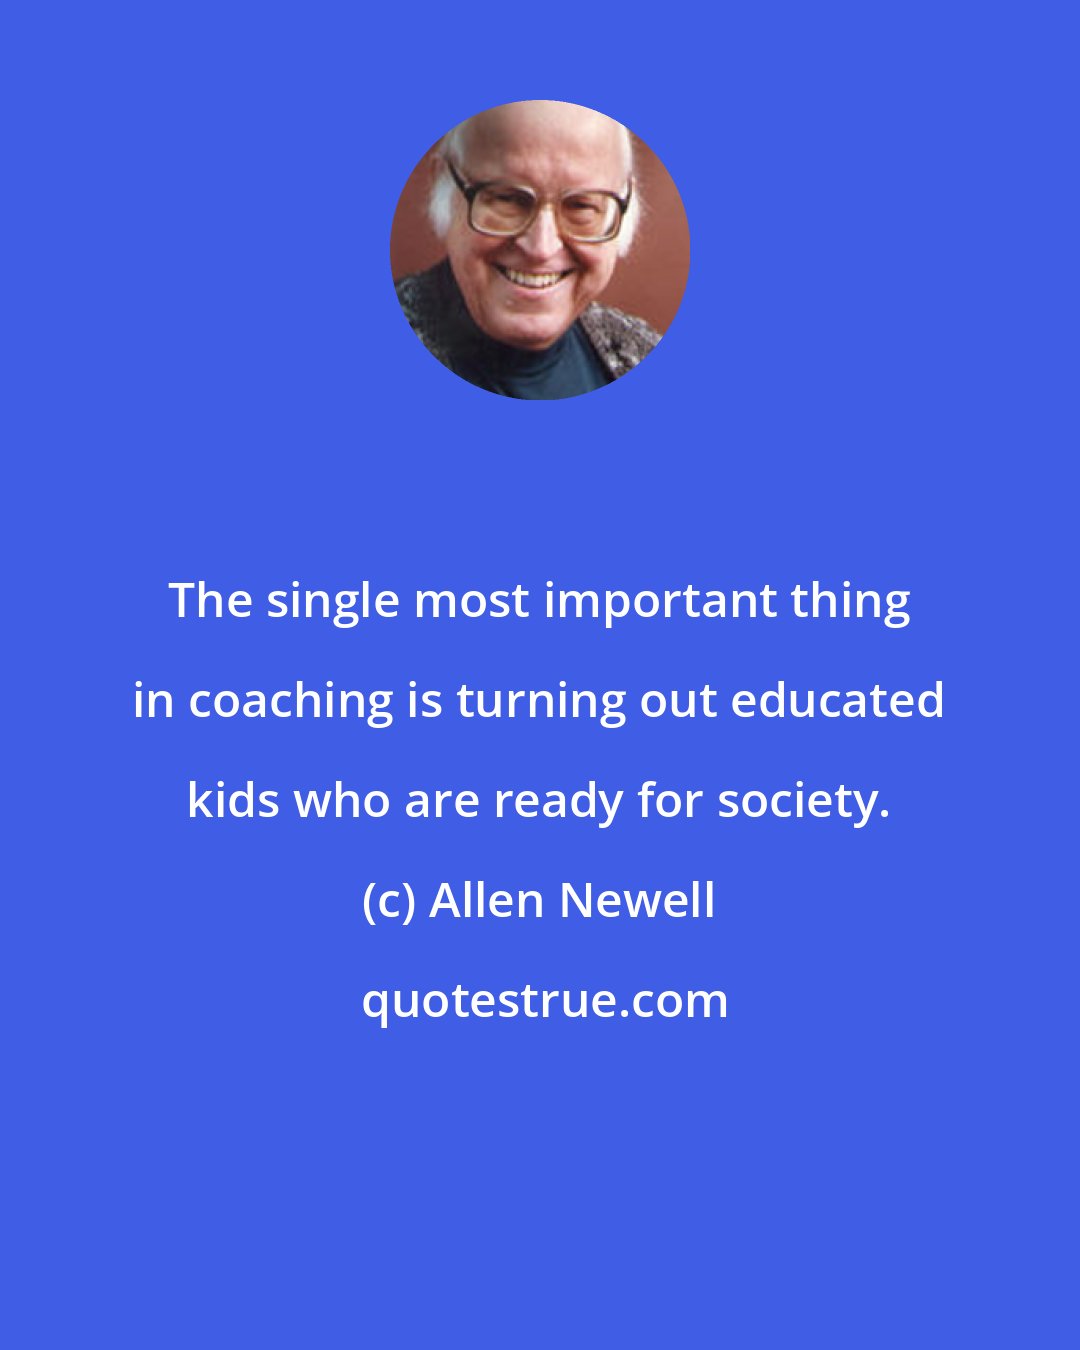 Allen Newell: The single most important thing in coaching is turning out educated kids who are ready for society.